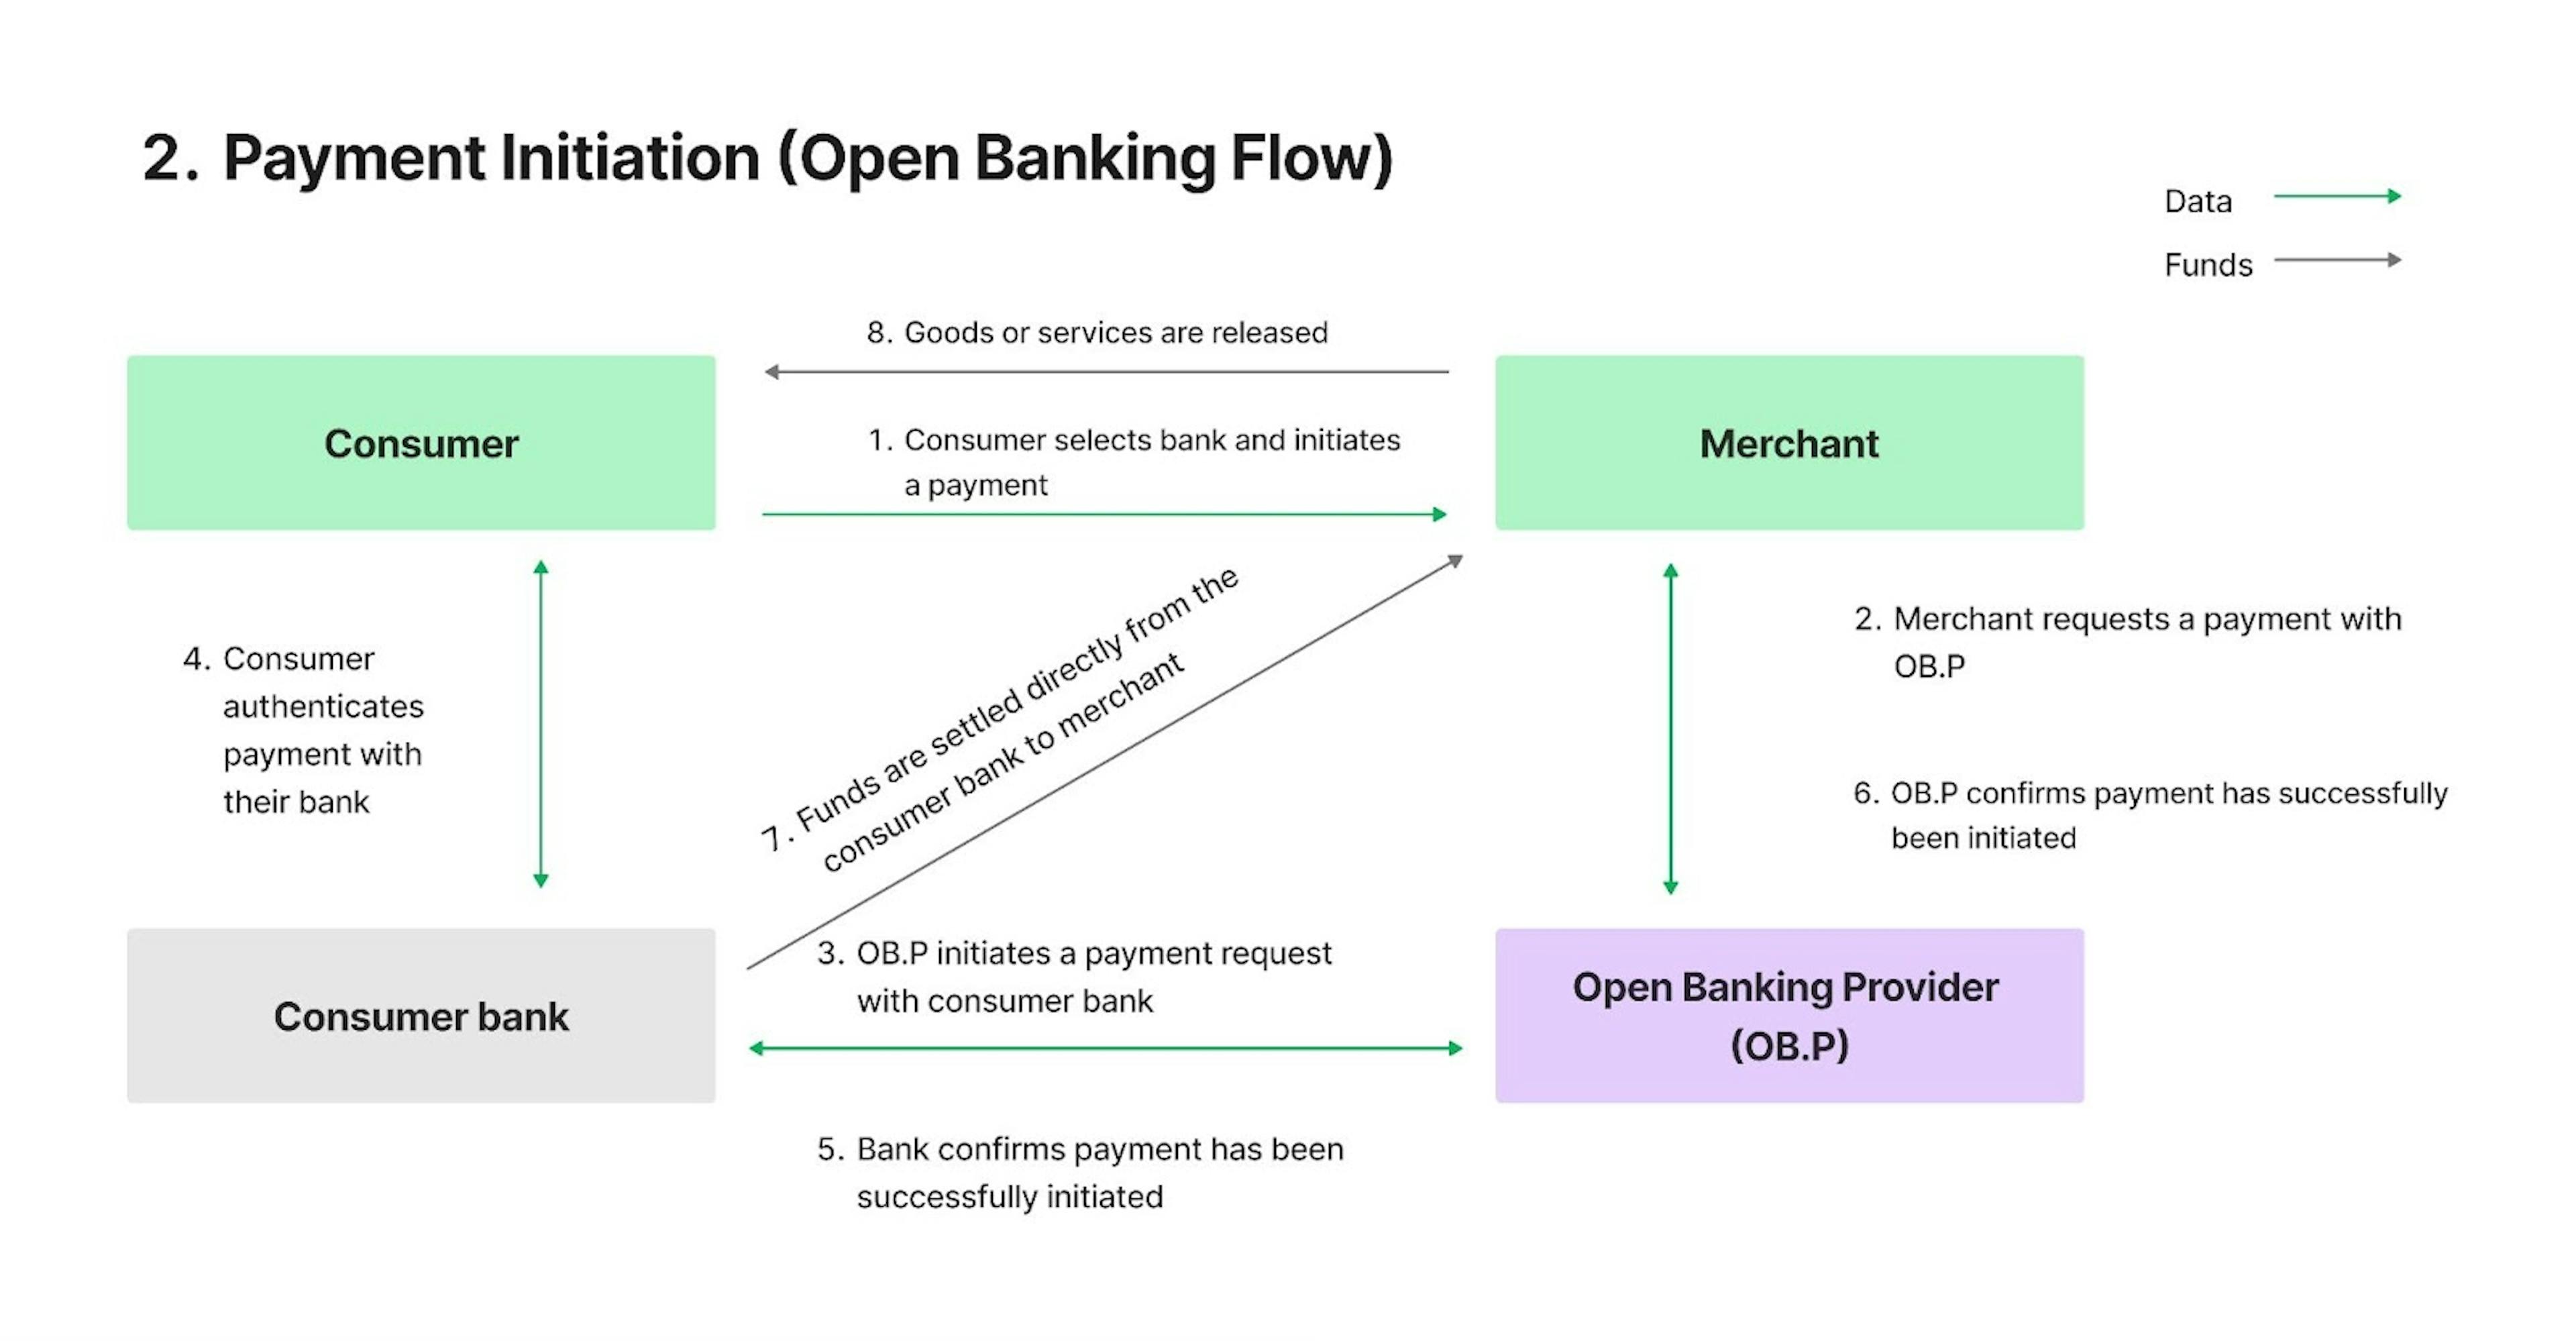 Payment Initiation (Open Banking Flow)